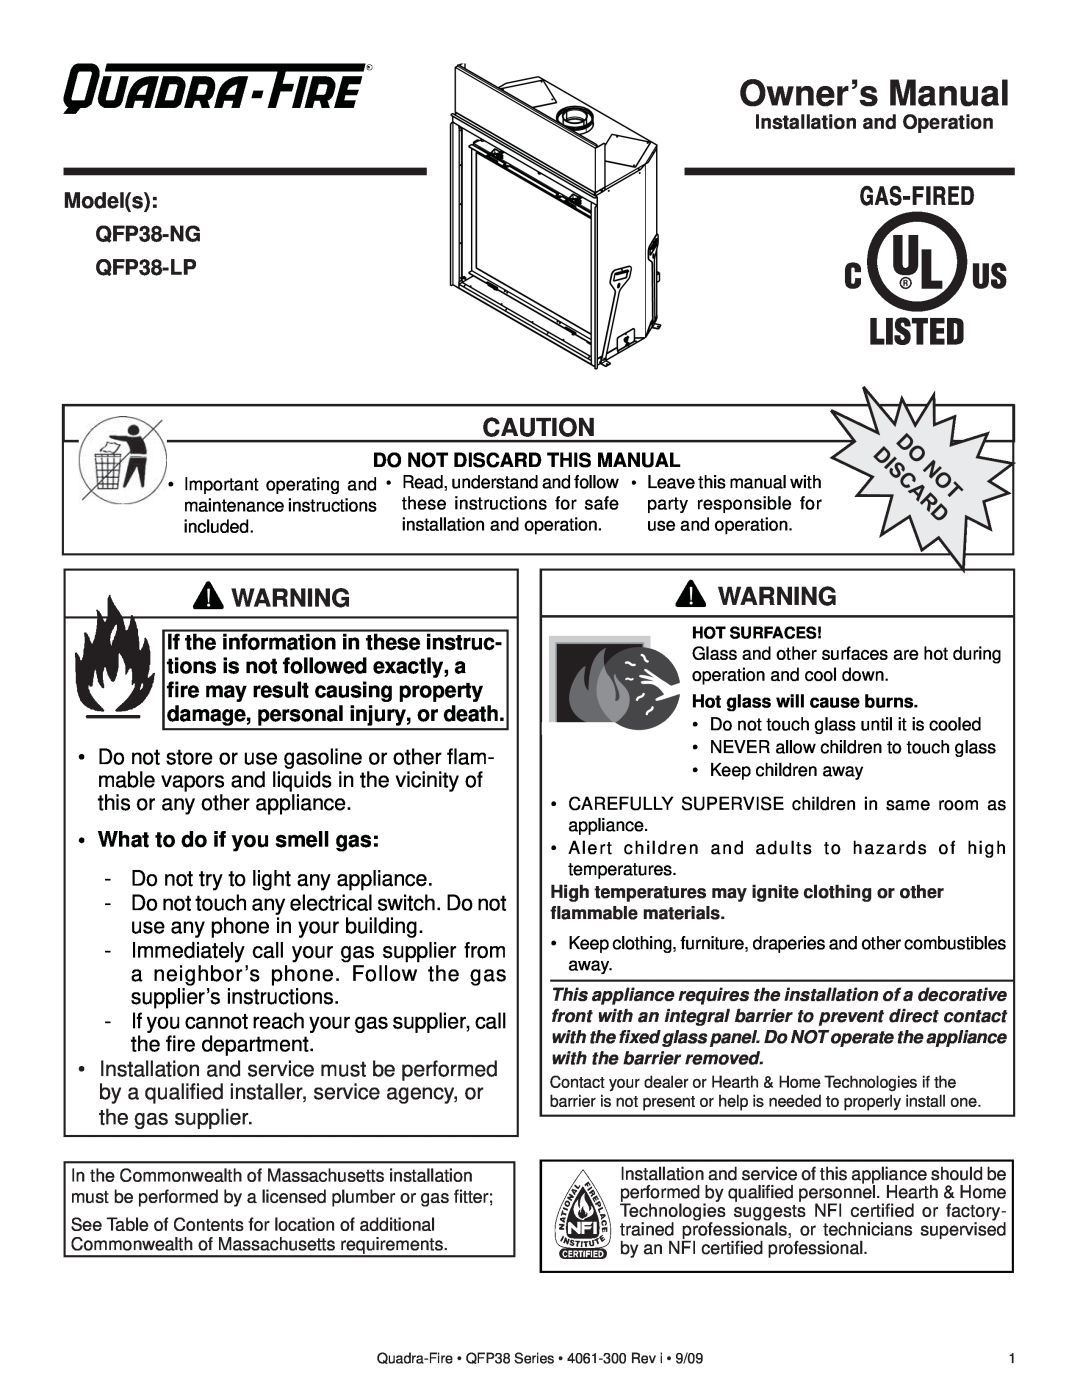 Quadra-Fire owner manual Models QFP38-NG QFP38-LP, Owner’s Manual, What to do if you smell gas 